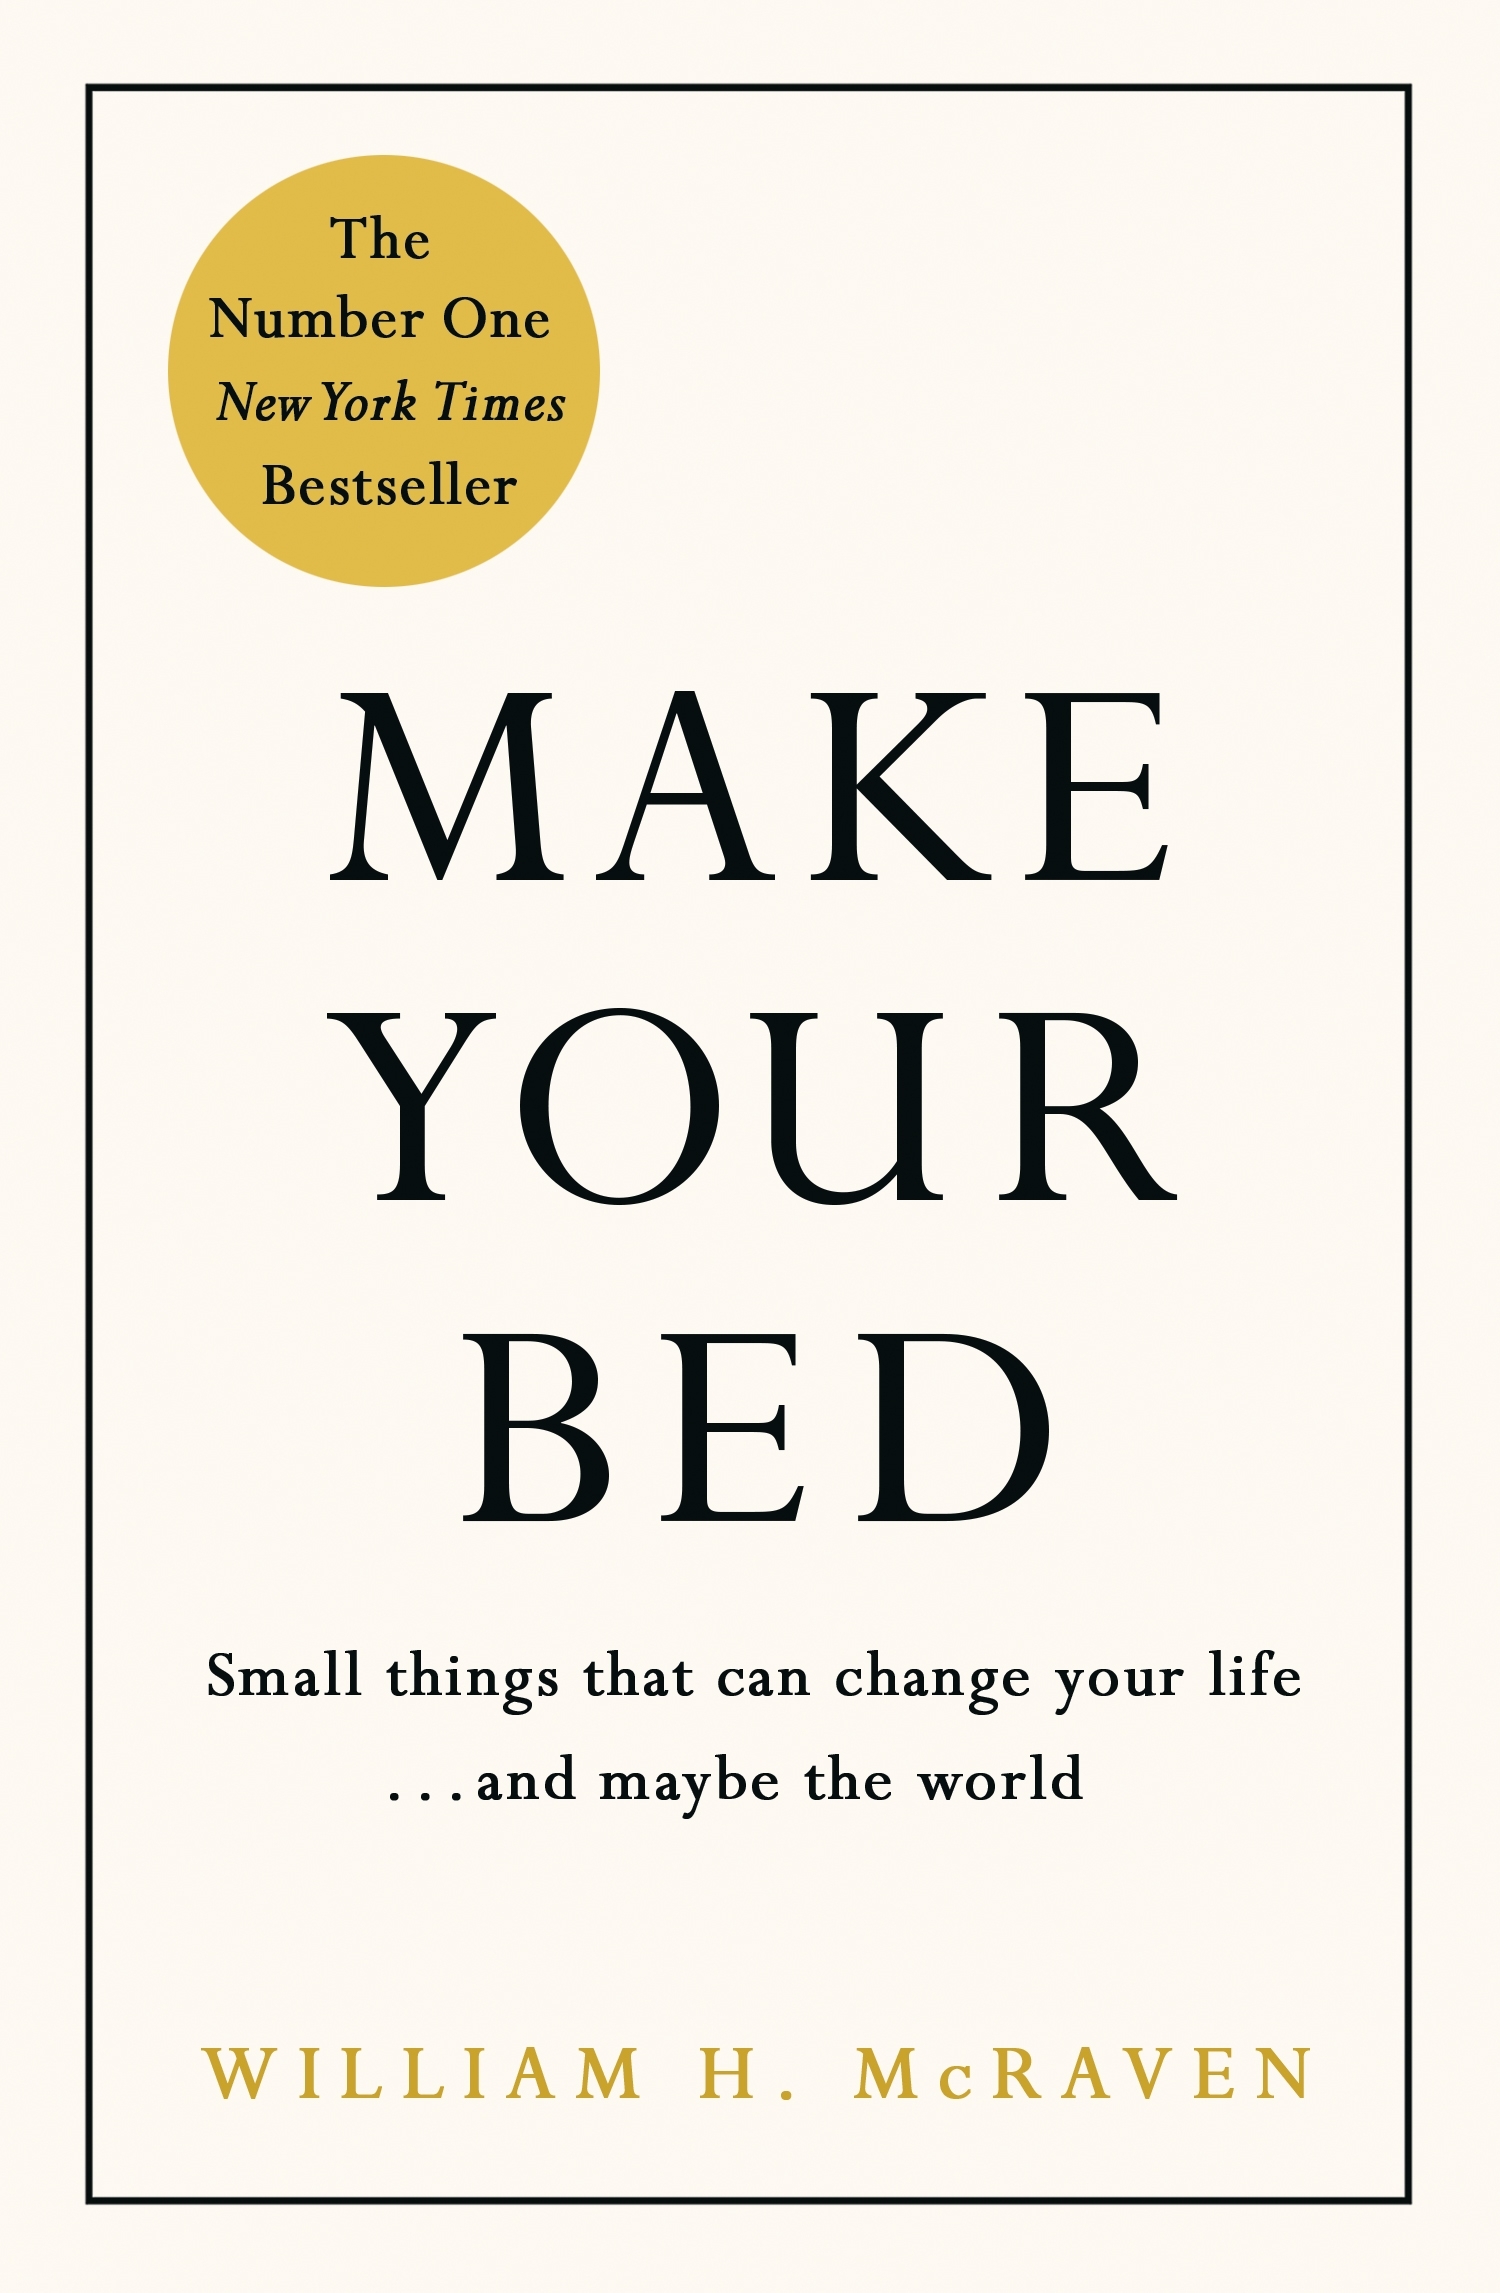 nytimes. making your bed